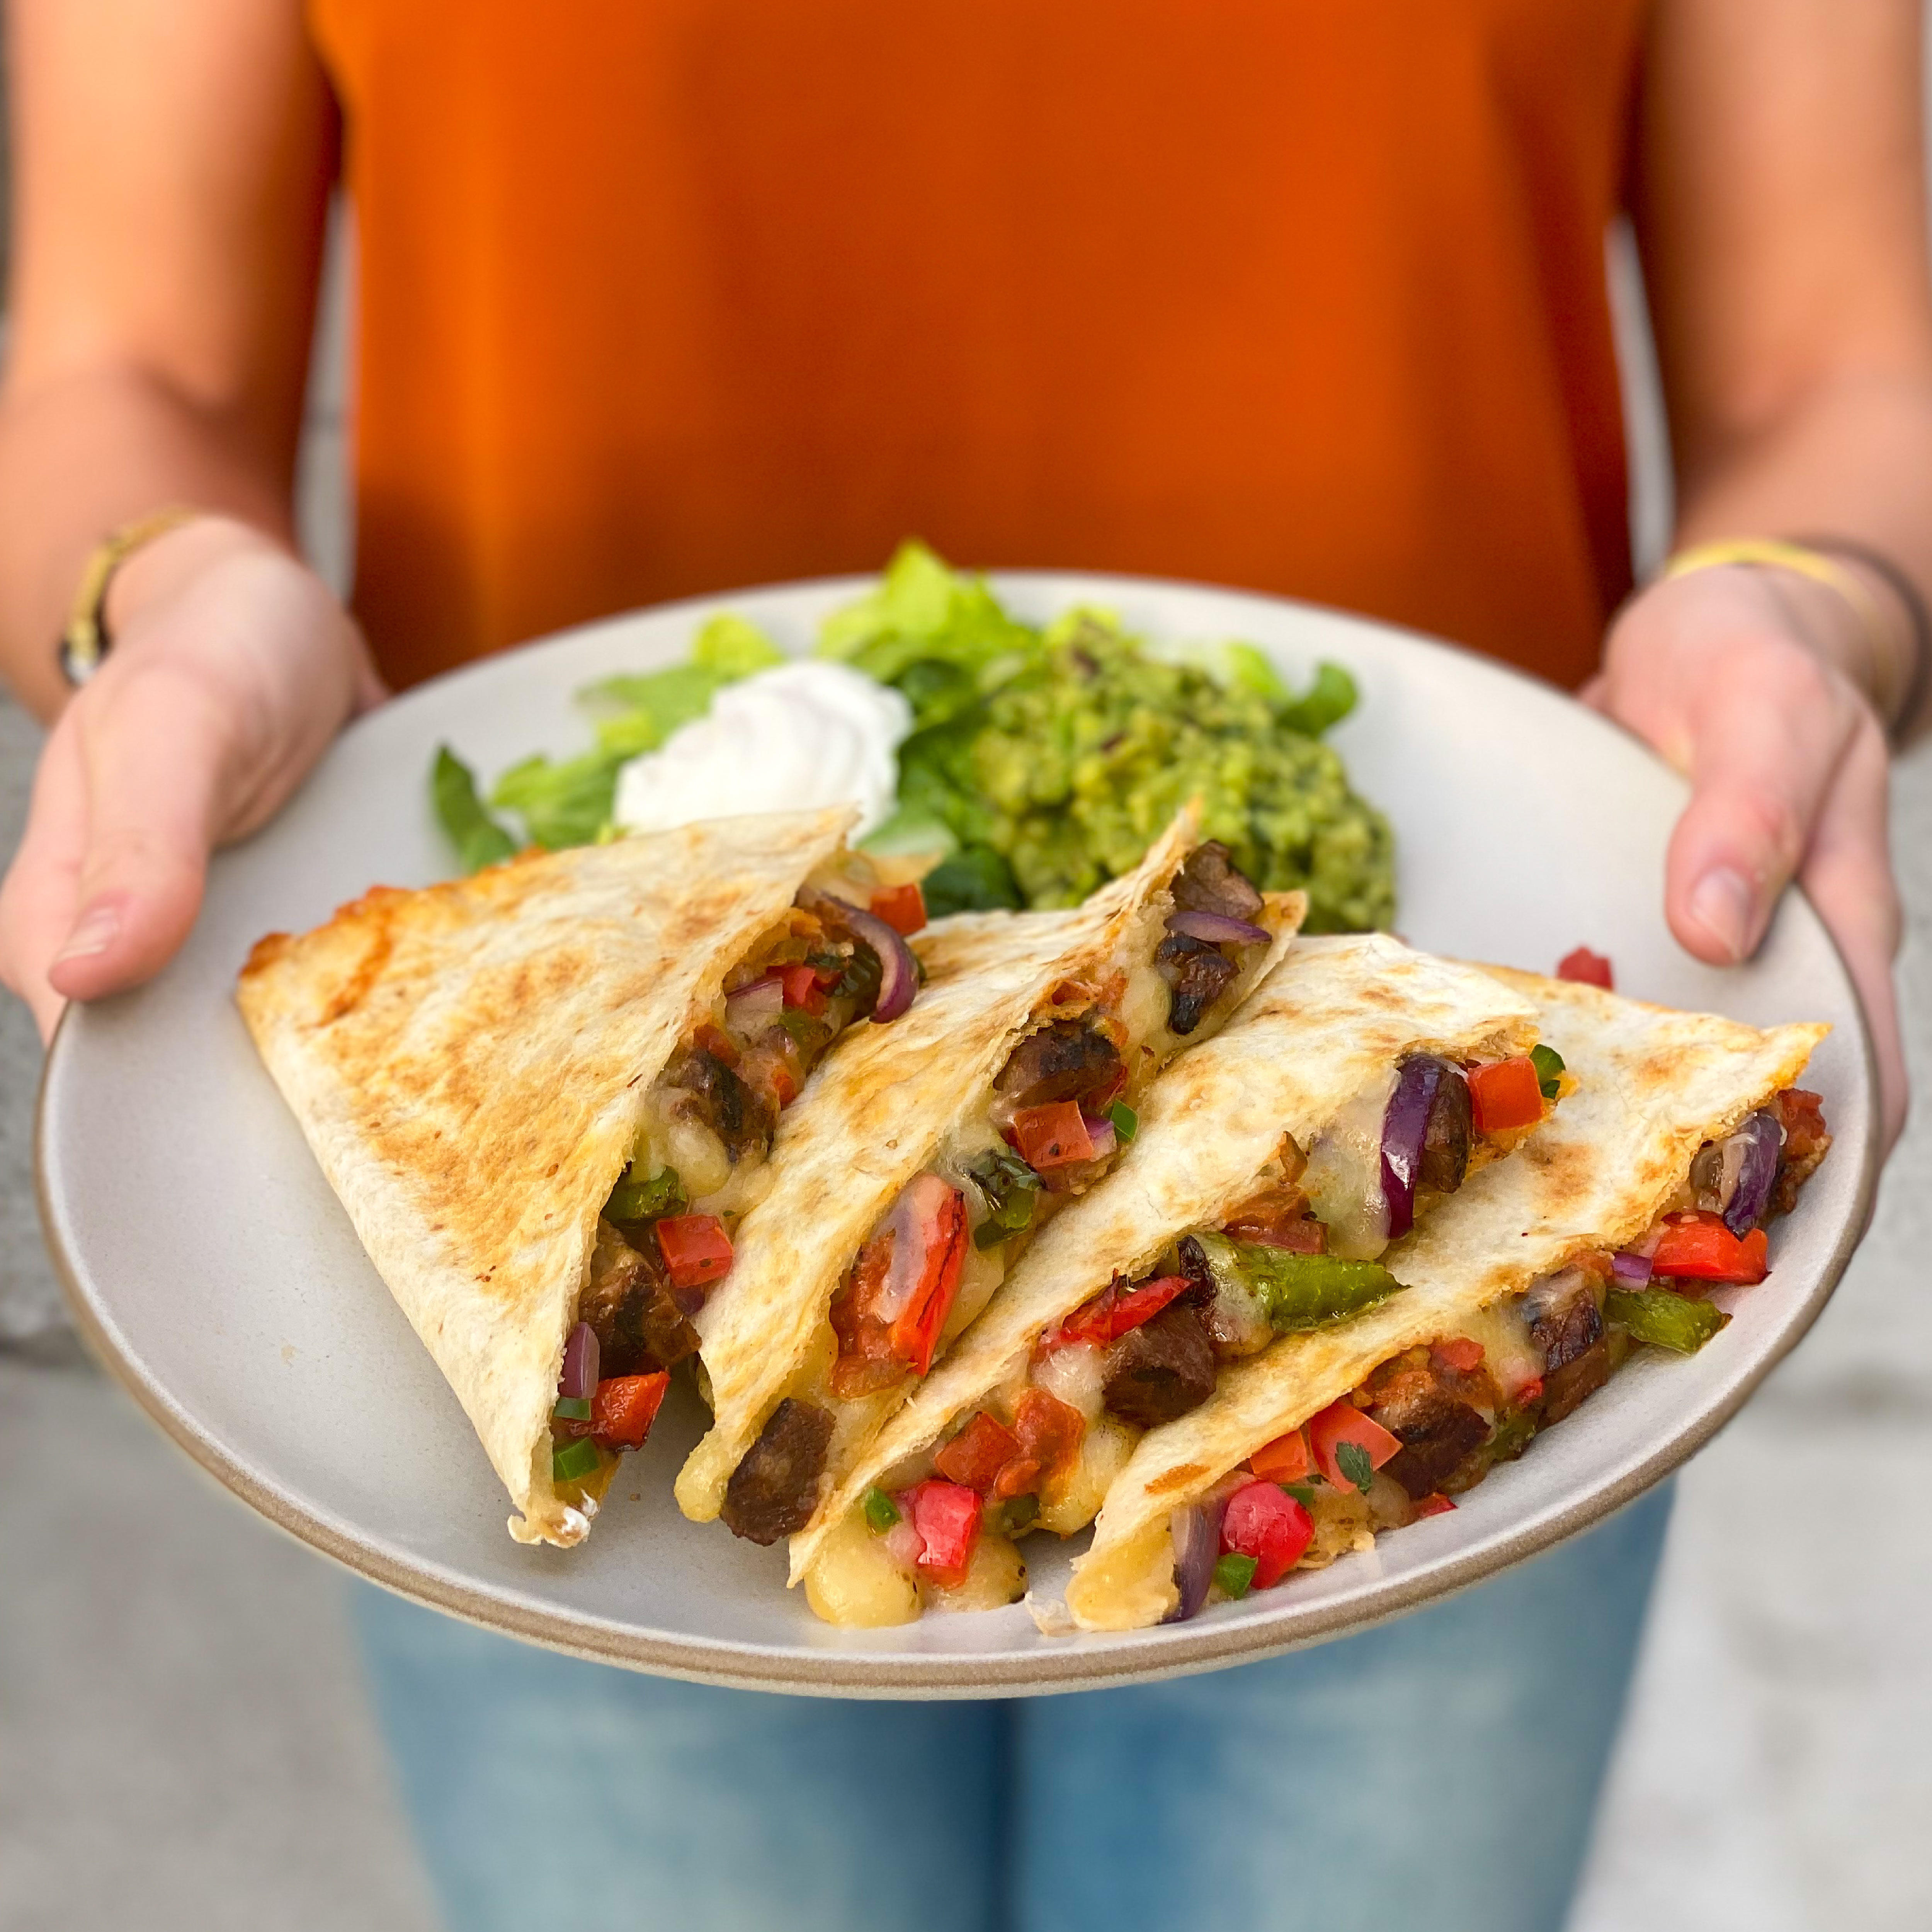 Grilled quesadillas are stuffed with chef-selected ingredients like grilled steak and hand-sliced,
sautéed-in-house fajita vegetables.